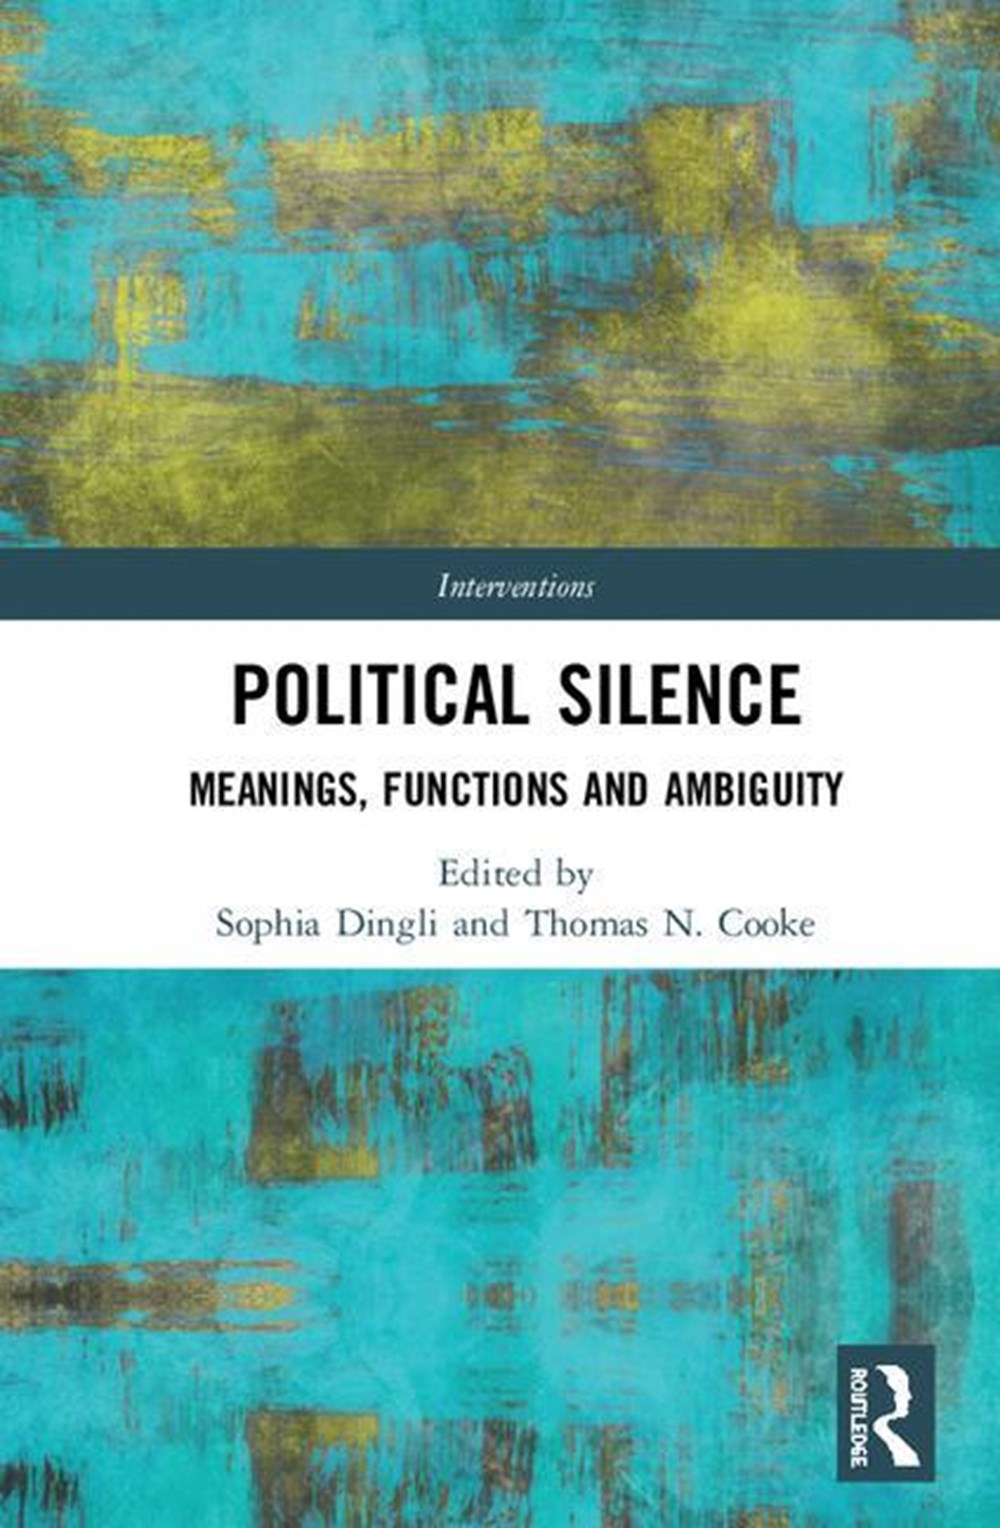 Political Silence: Meanings, Functions and Ambiguity